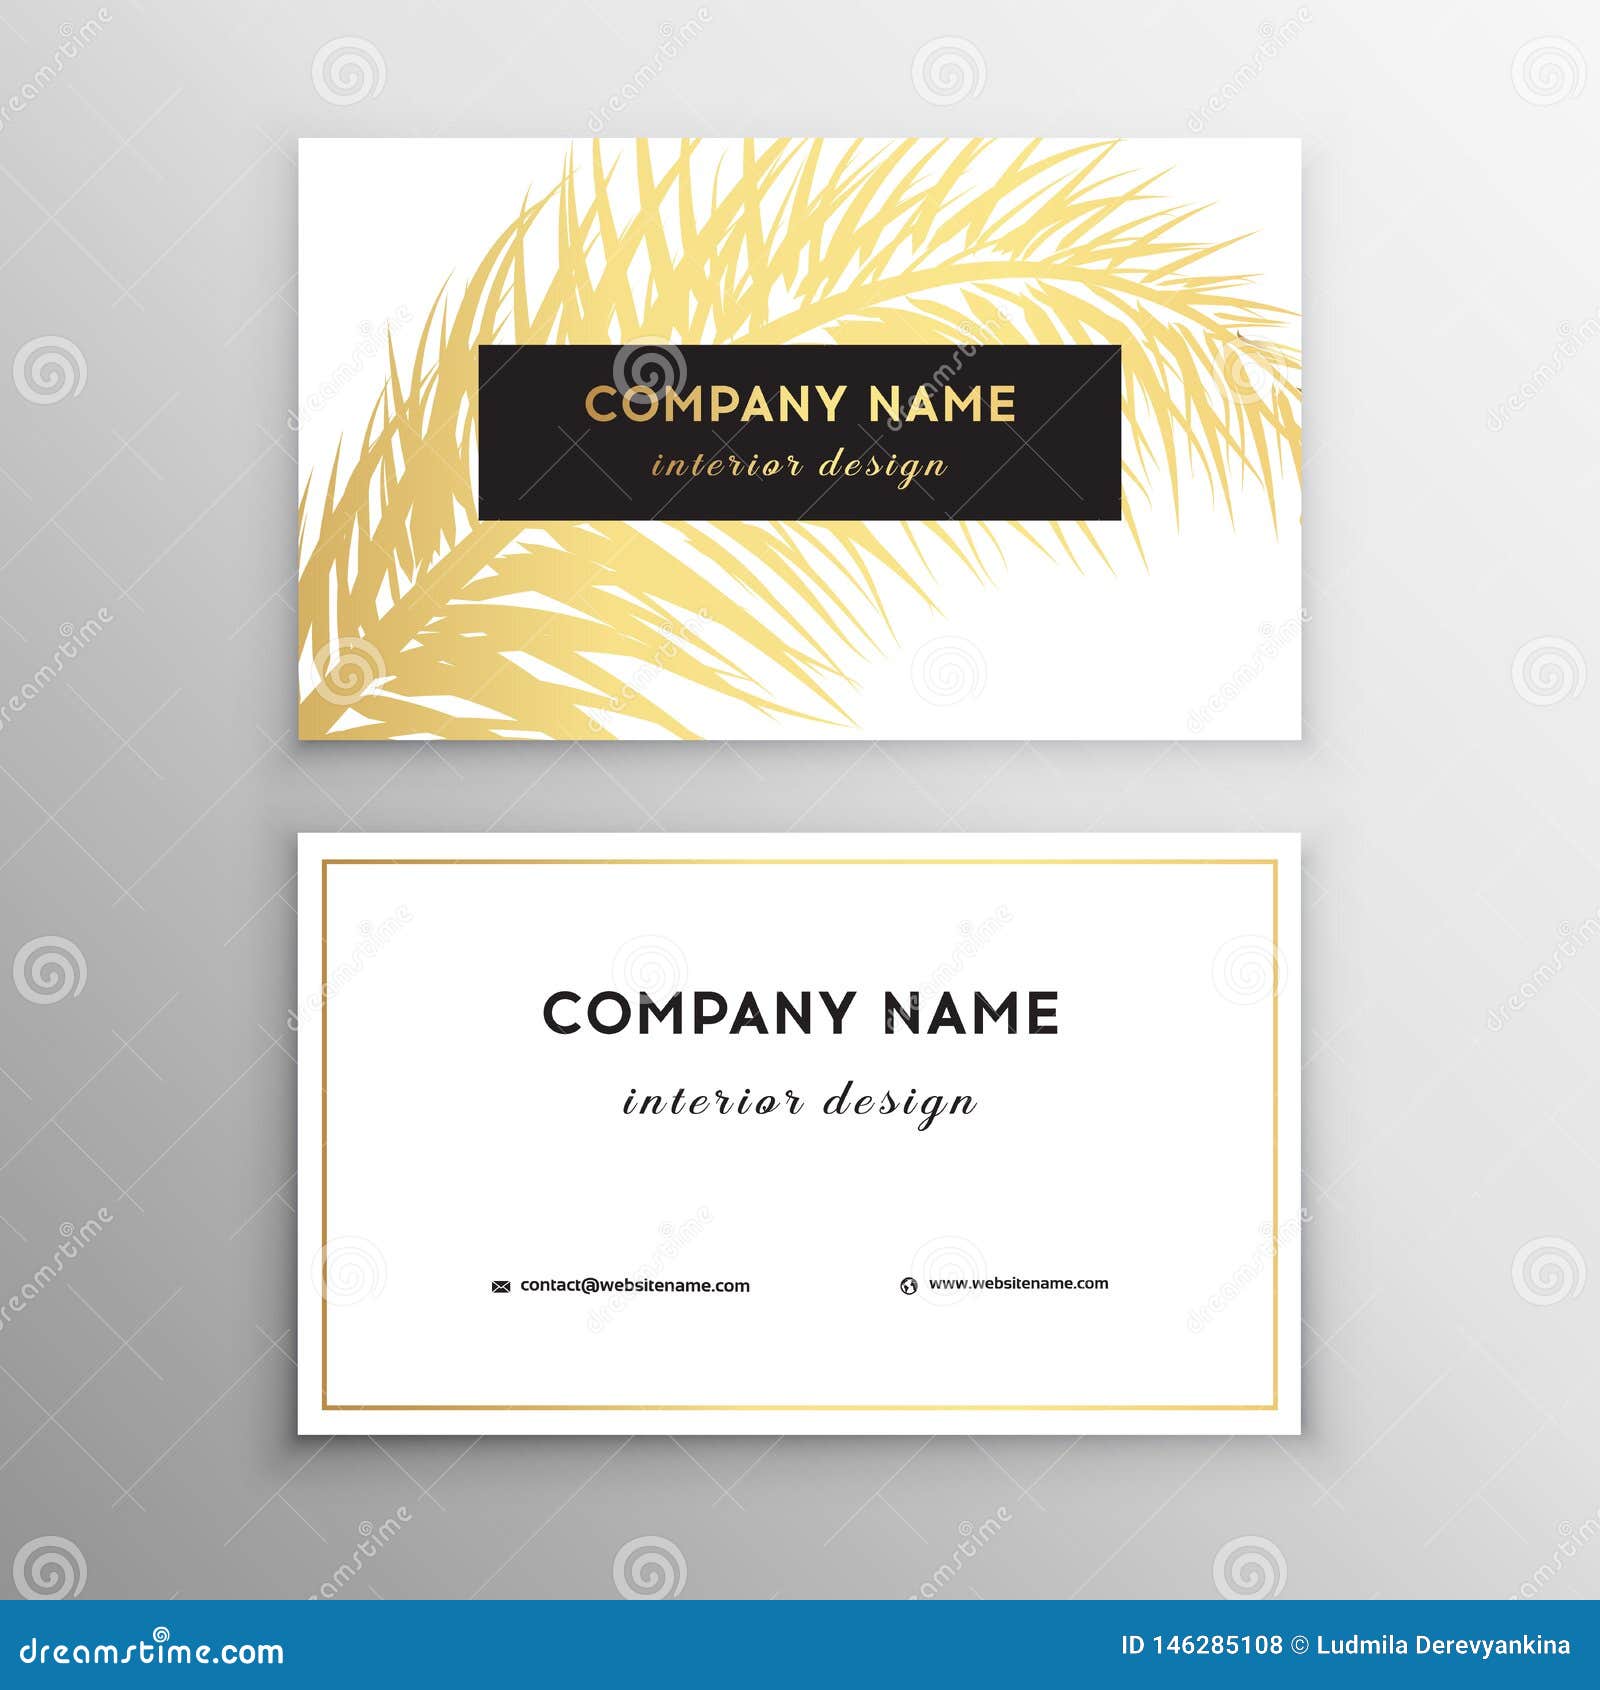 Business Cards Tropical Graphic Design Tropical Palm Leaf